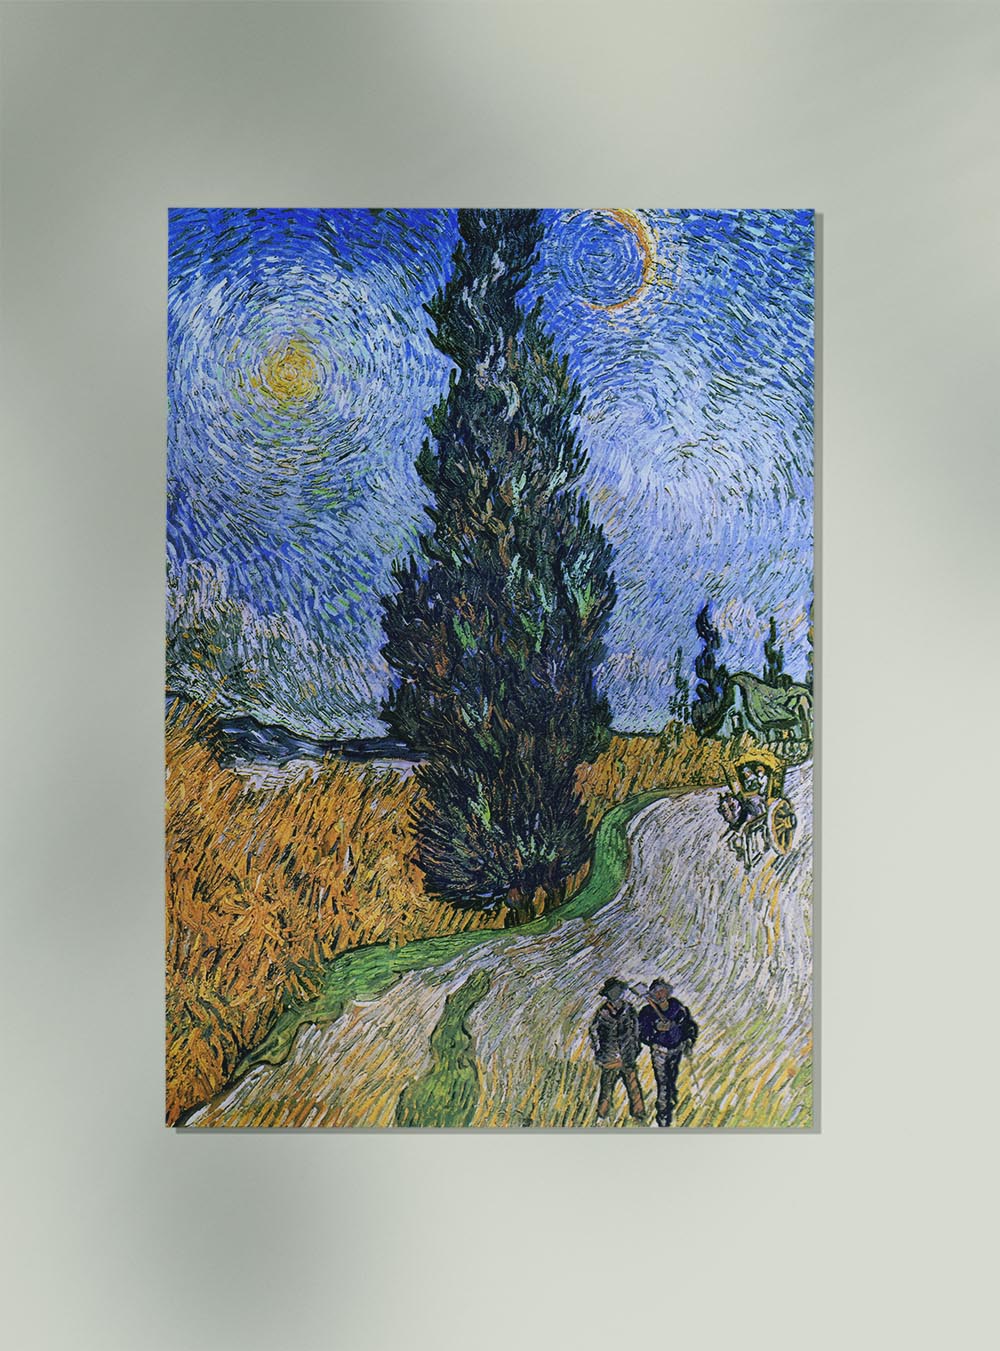 Road with Cypress and Star Art Print by Van Gogh